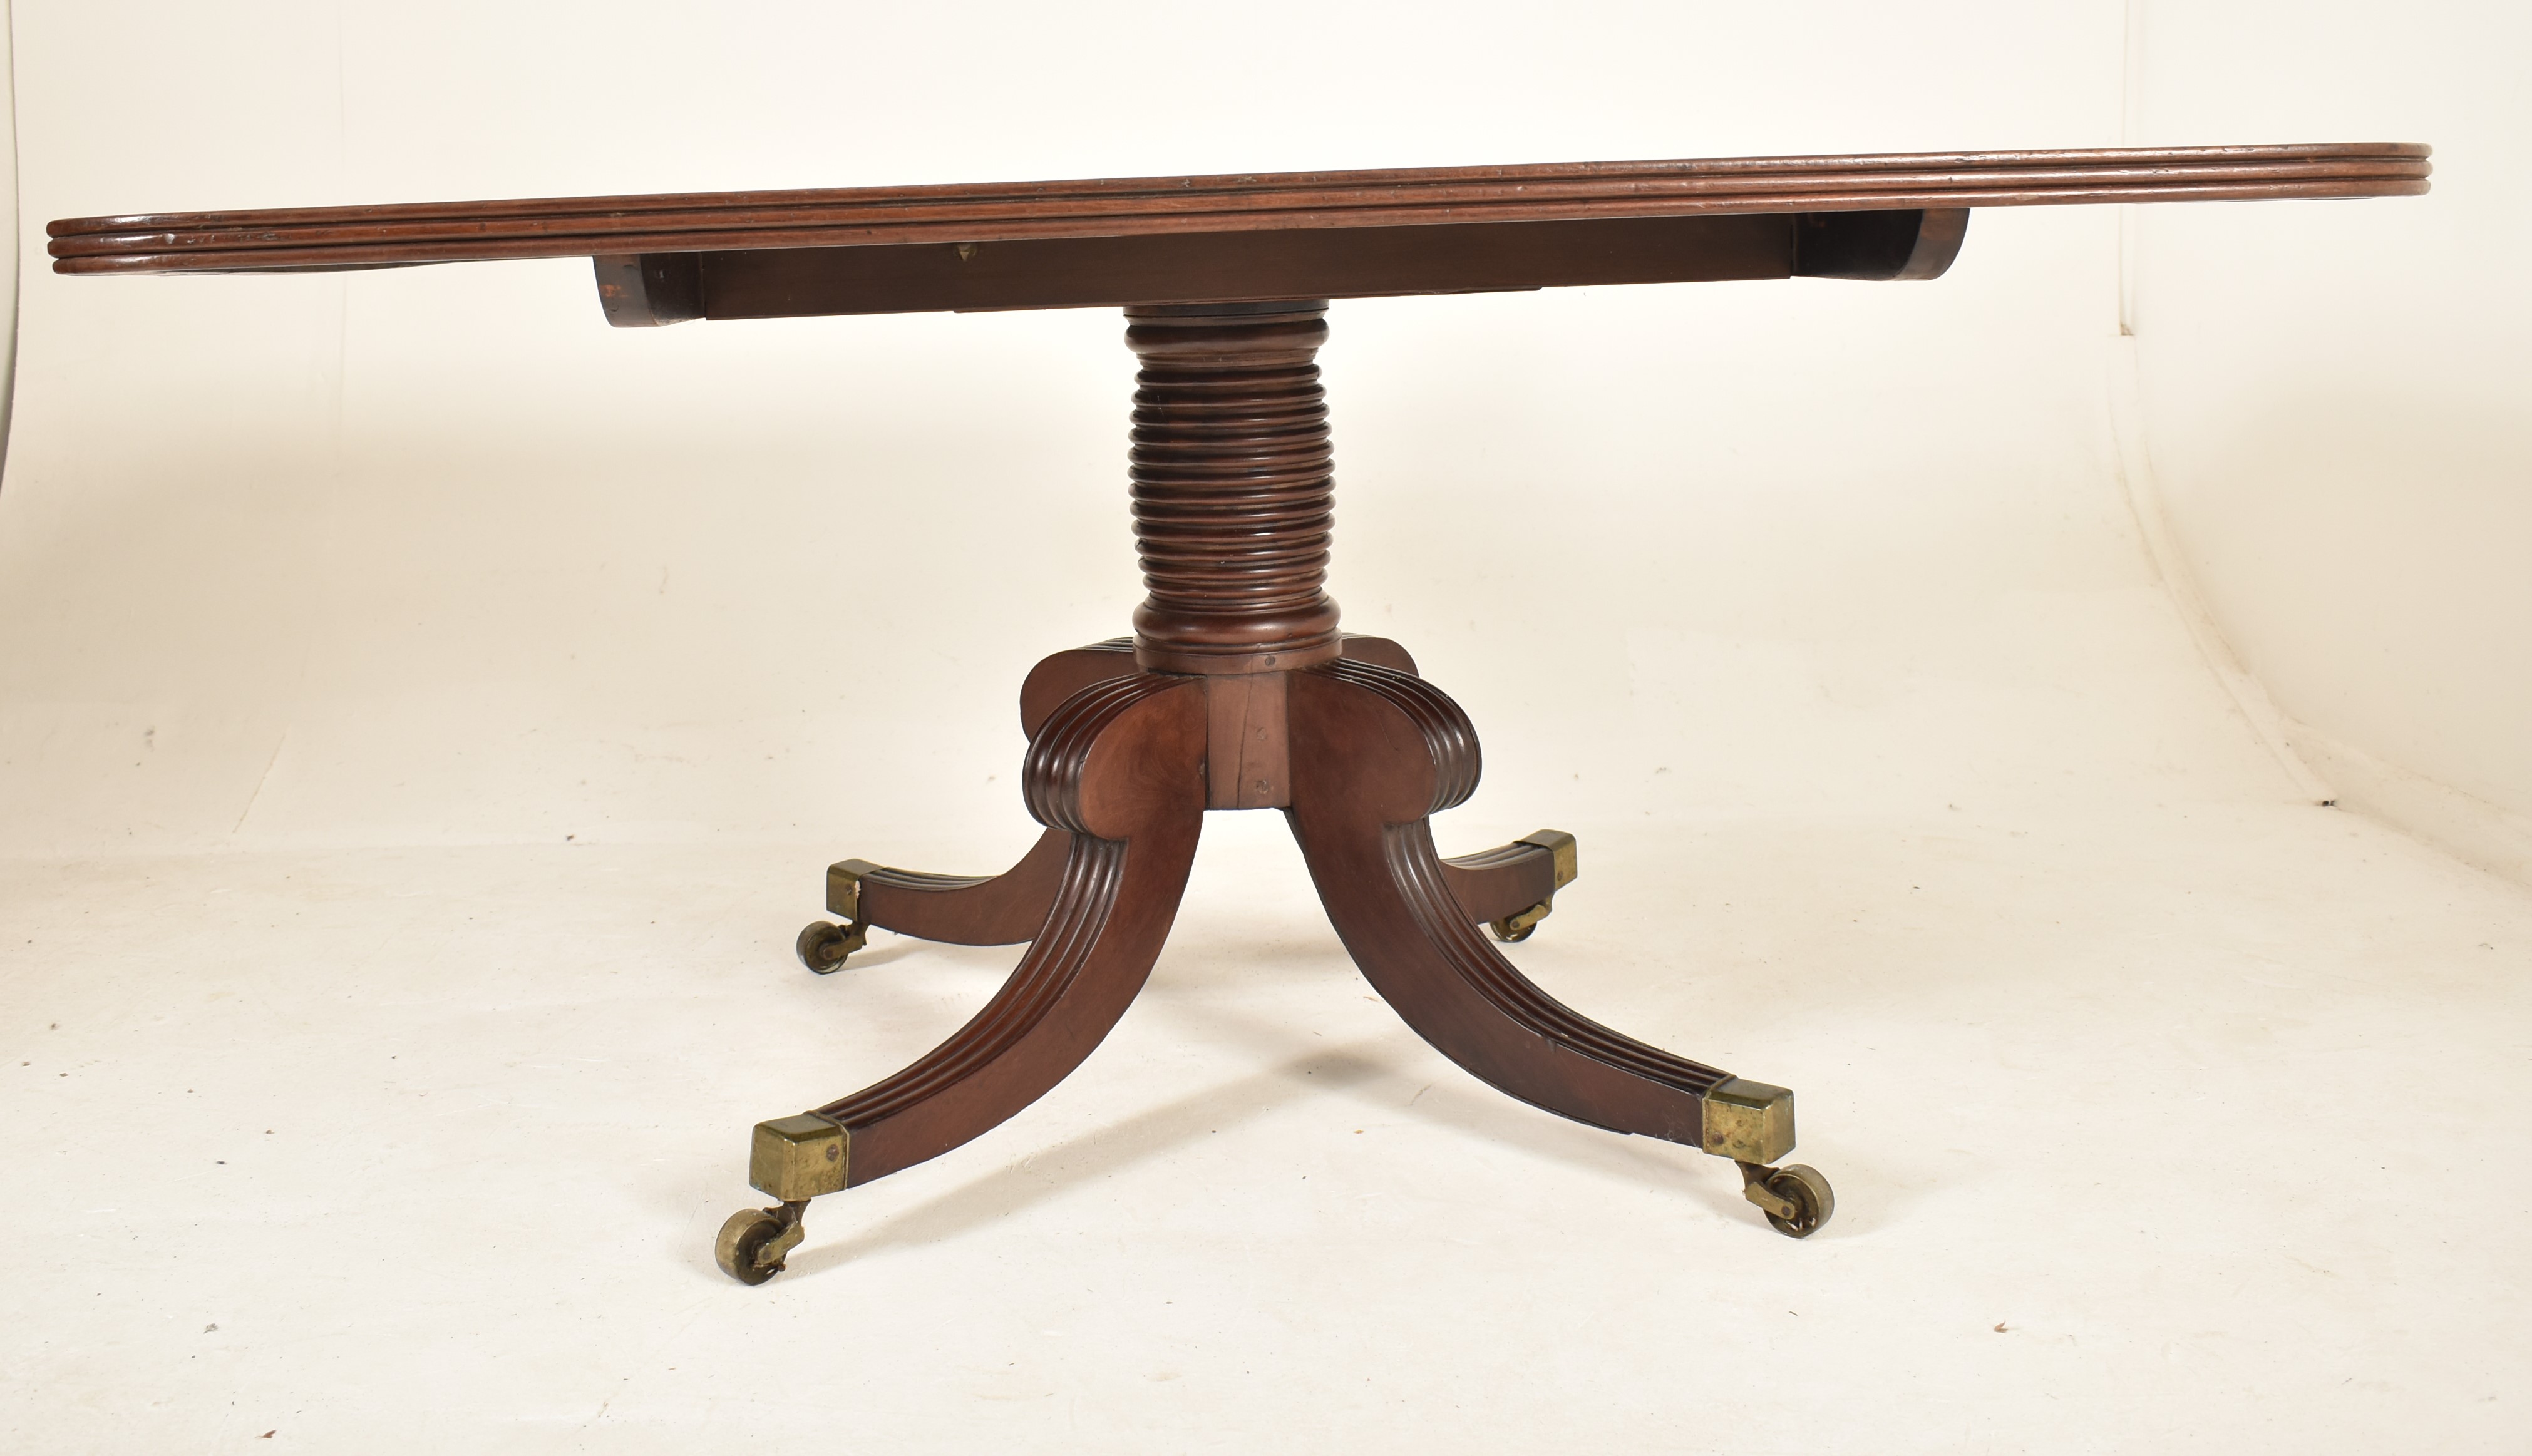 REGENCY 19TH CENTURY MAHOGANY TILT TOP DINING TABLE WITH CHAIRS - Image 3 of 10